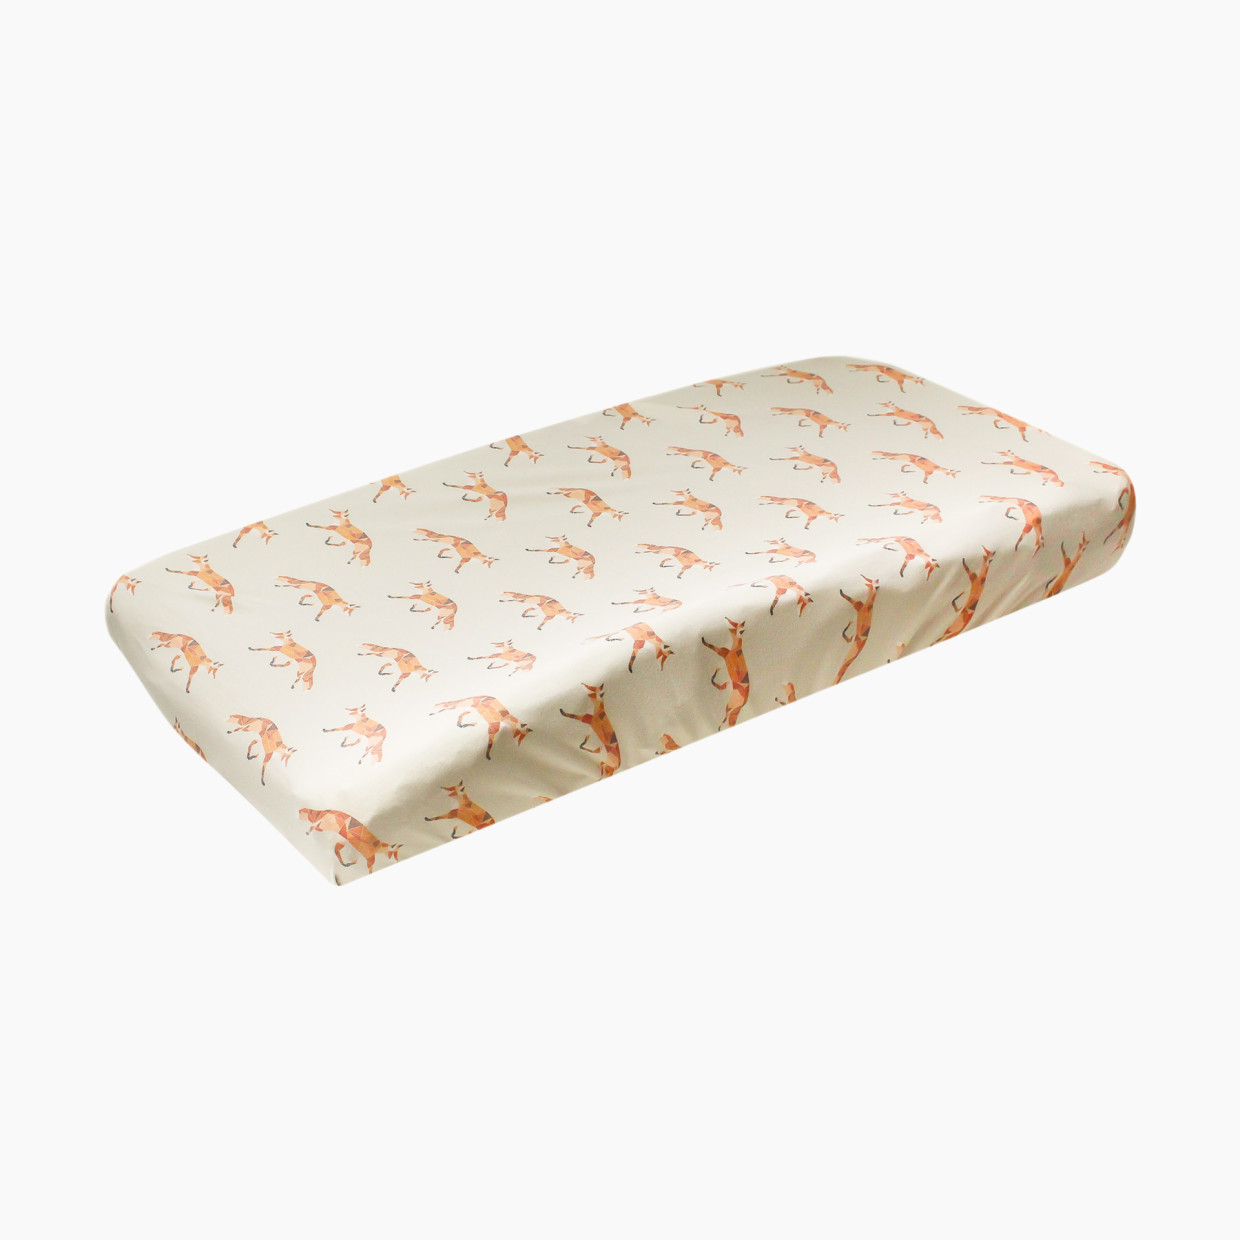 Copper Pearl Premium Knit Diaper Changing Pad Cover - Swift.